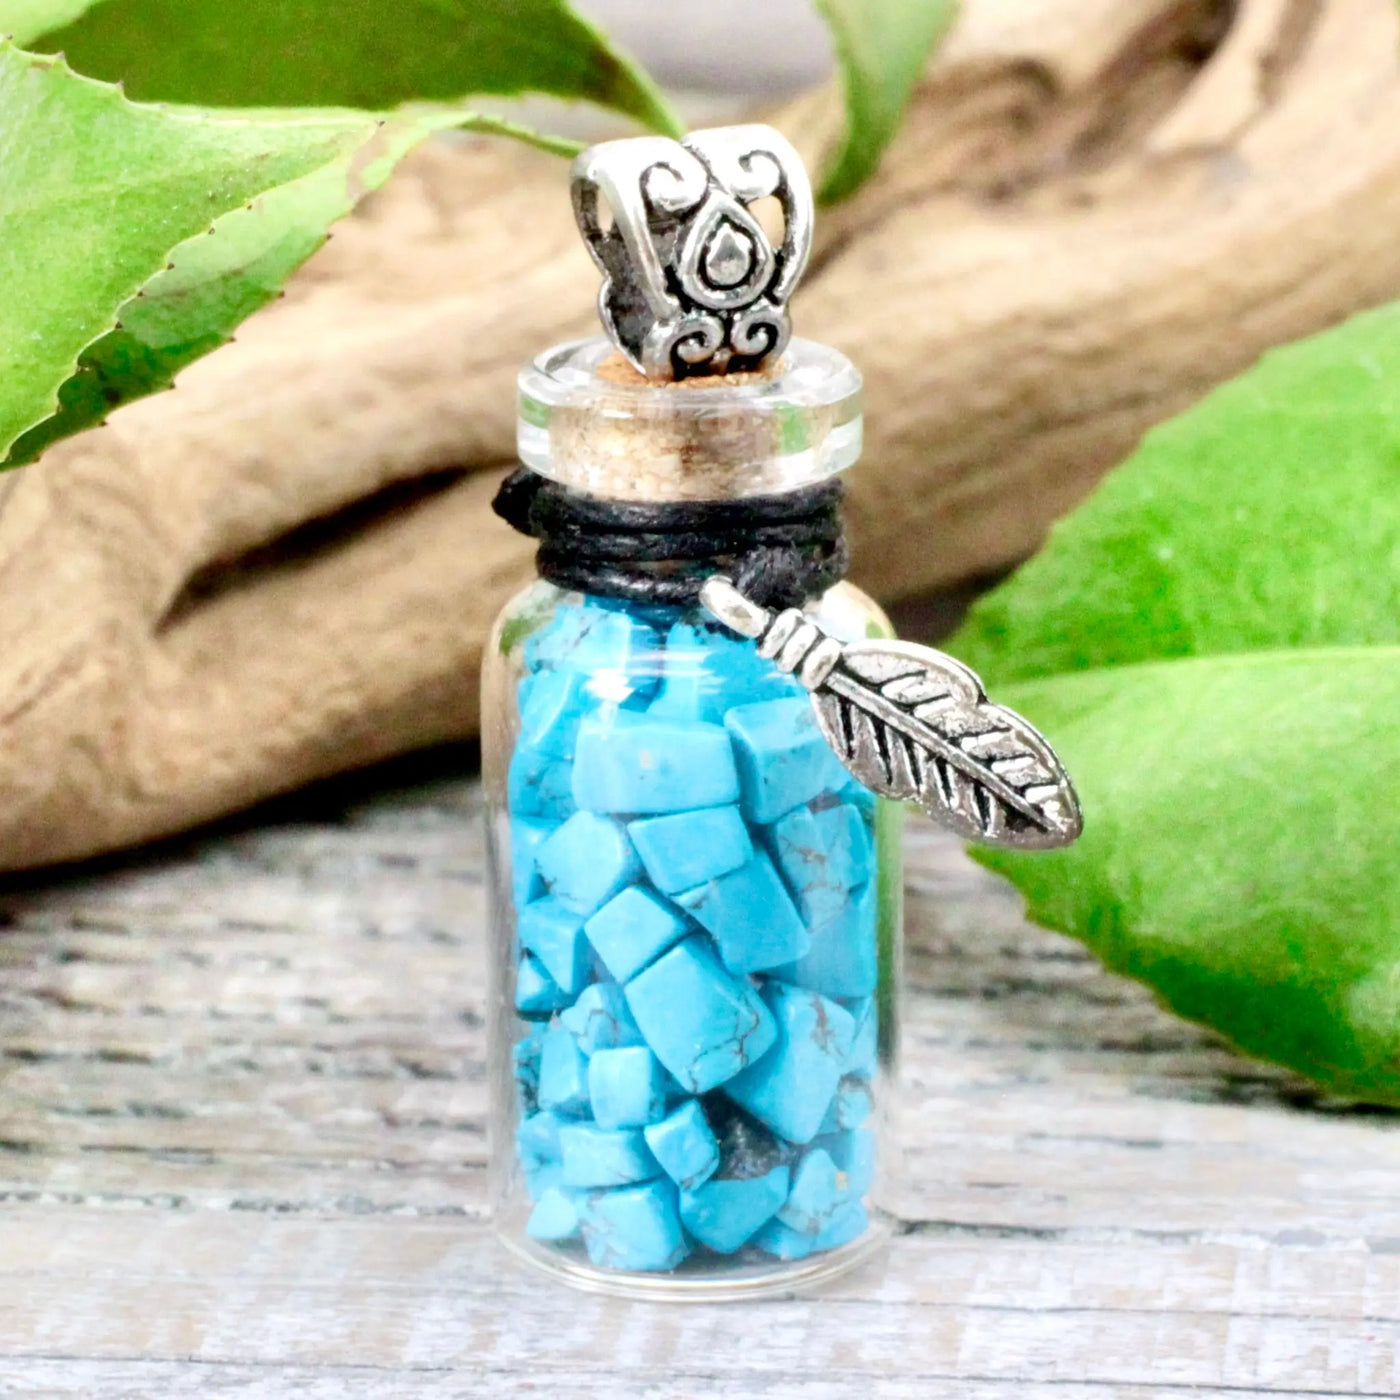 Dream Protection Spell Jar with Turquoise Necklace